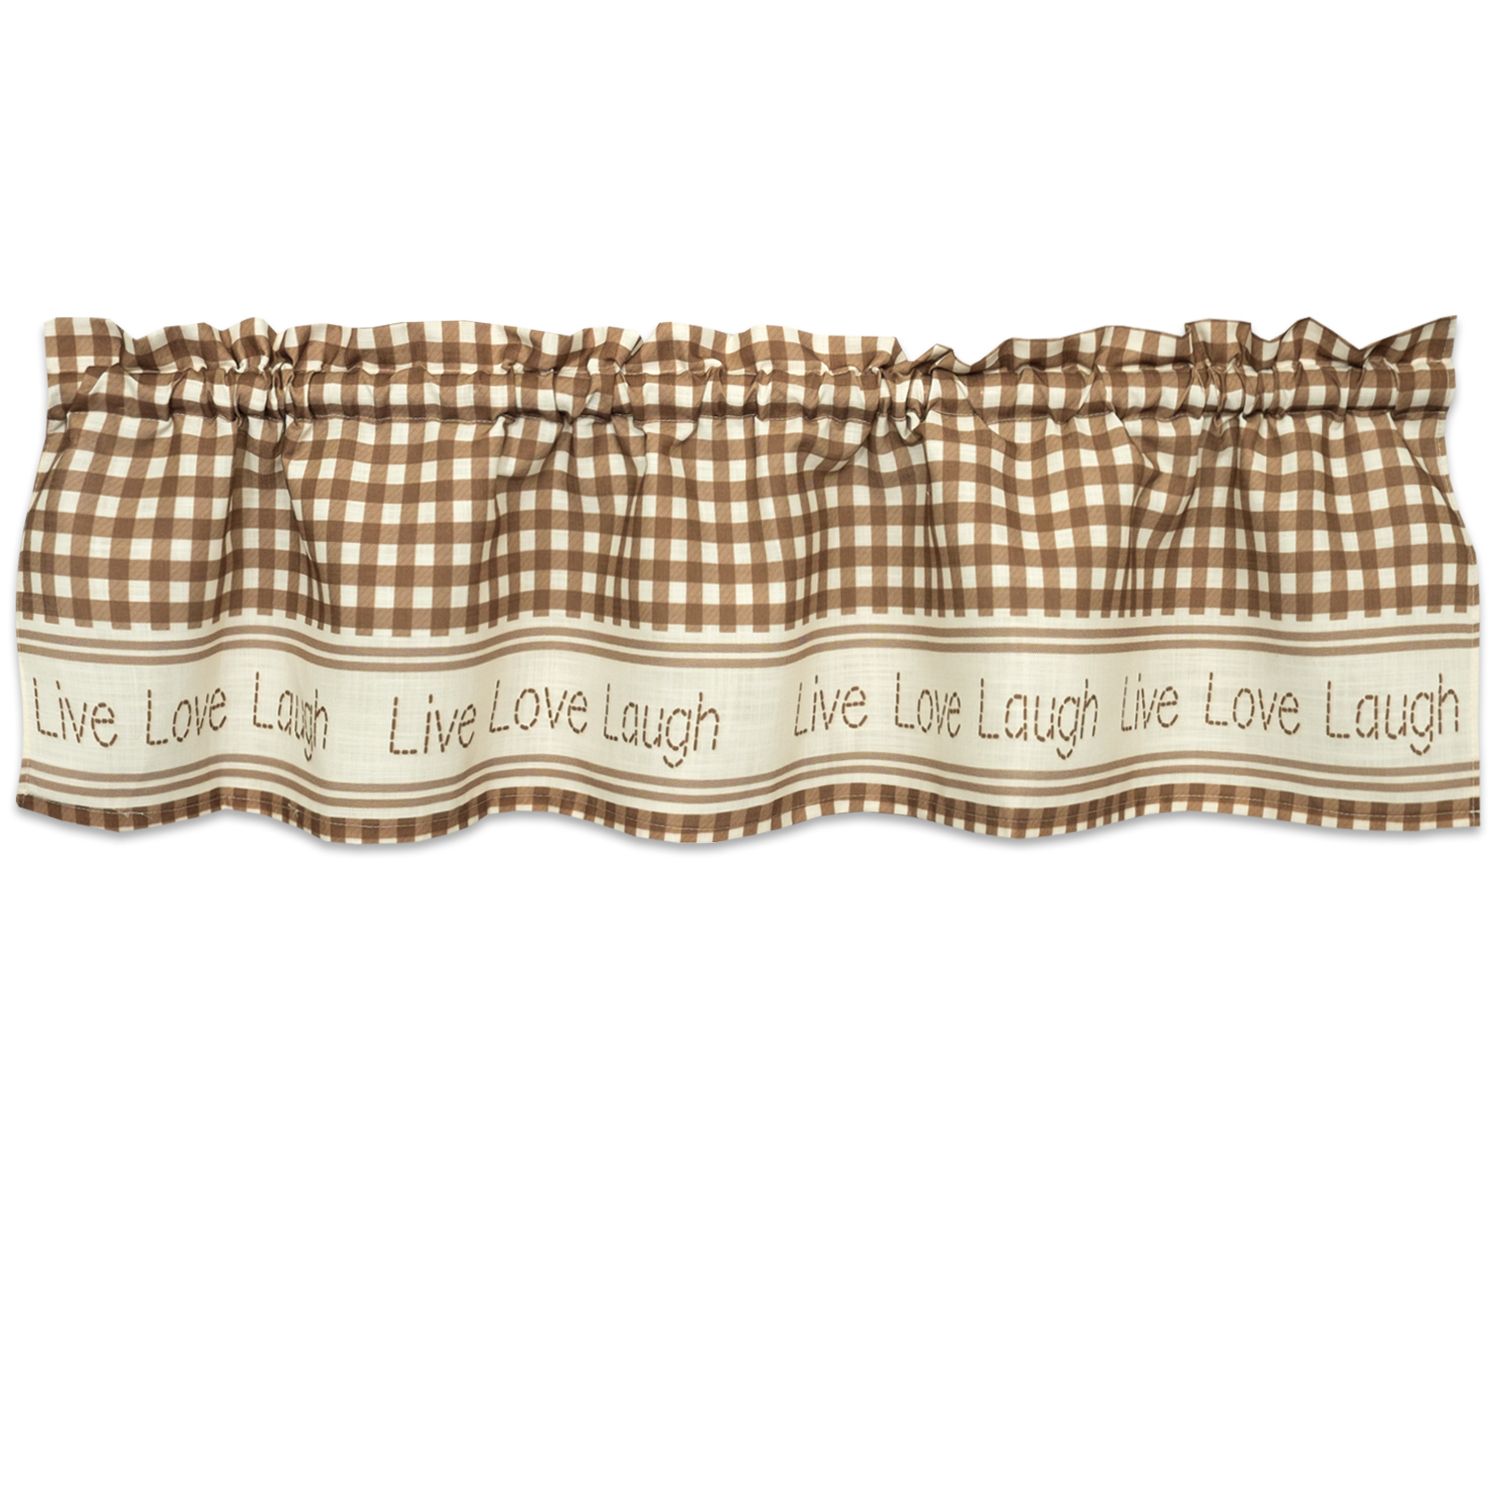 Gingham Stitch Live Laugh Love Kitchen Curtain Tier Pair Or Valance Toast For Live, Love, Laugh Window Curtain Tier Pair And Valance Sets (View 16 of 20)